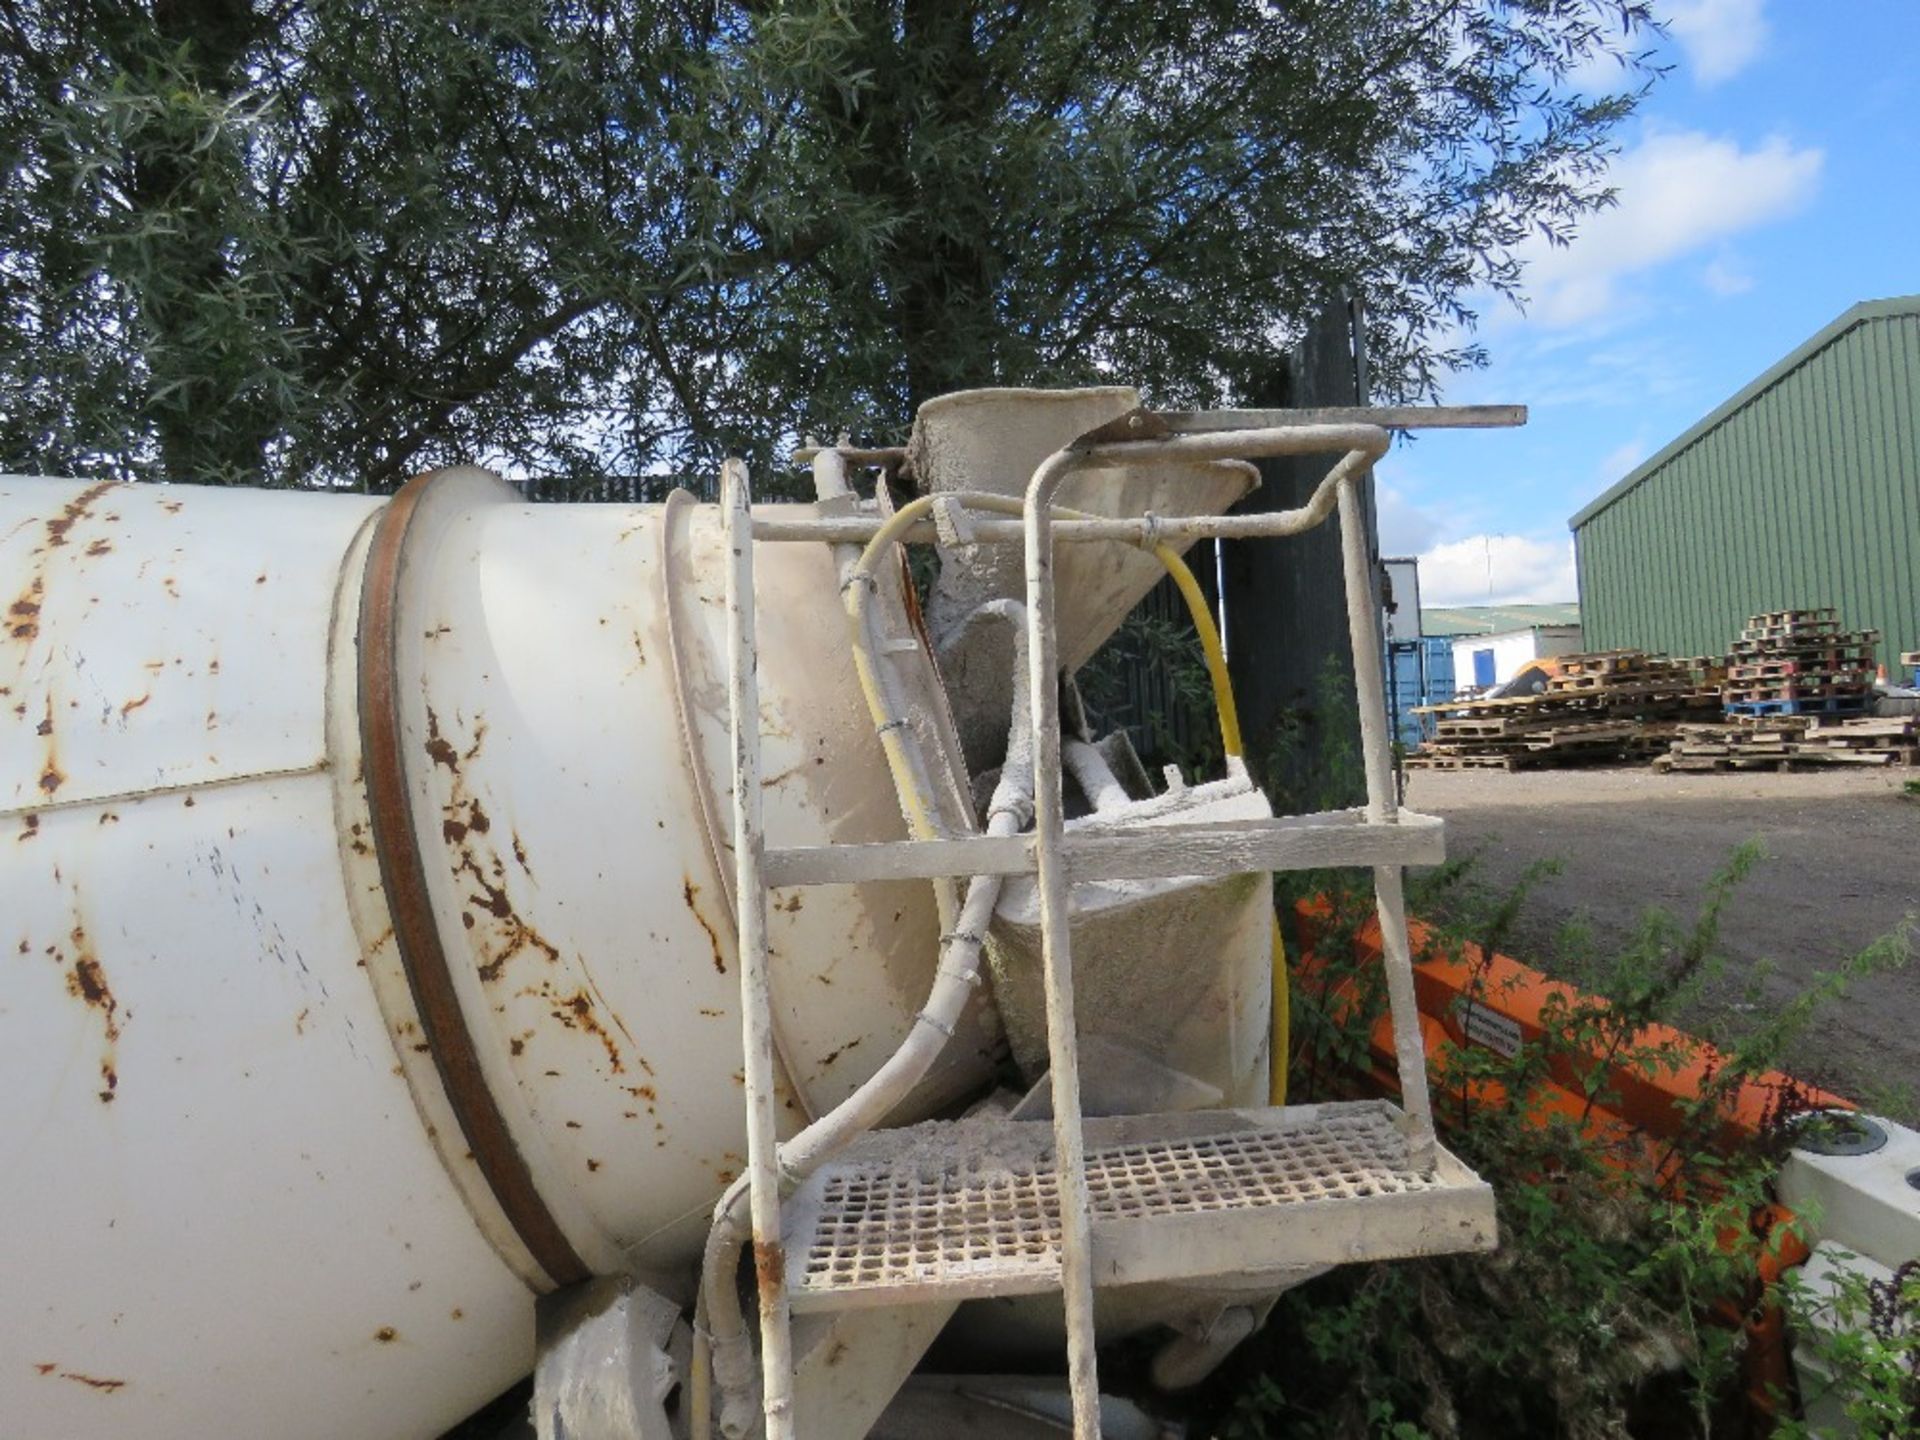 LORRY CEMENT MIXER DRUM RECENTLY REMOVED FROM 8 WHEEL DAF LORRY, COMPLETE WITH PTO PUMP. - Image 7 of 7